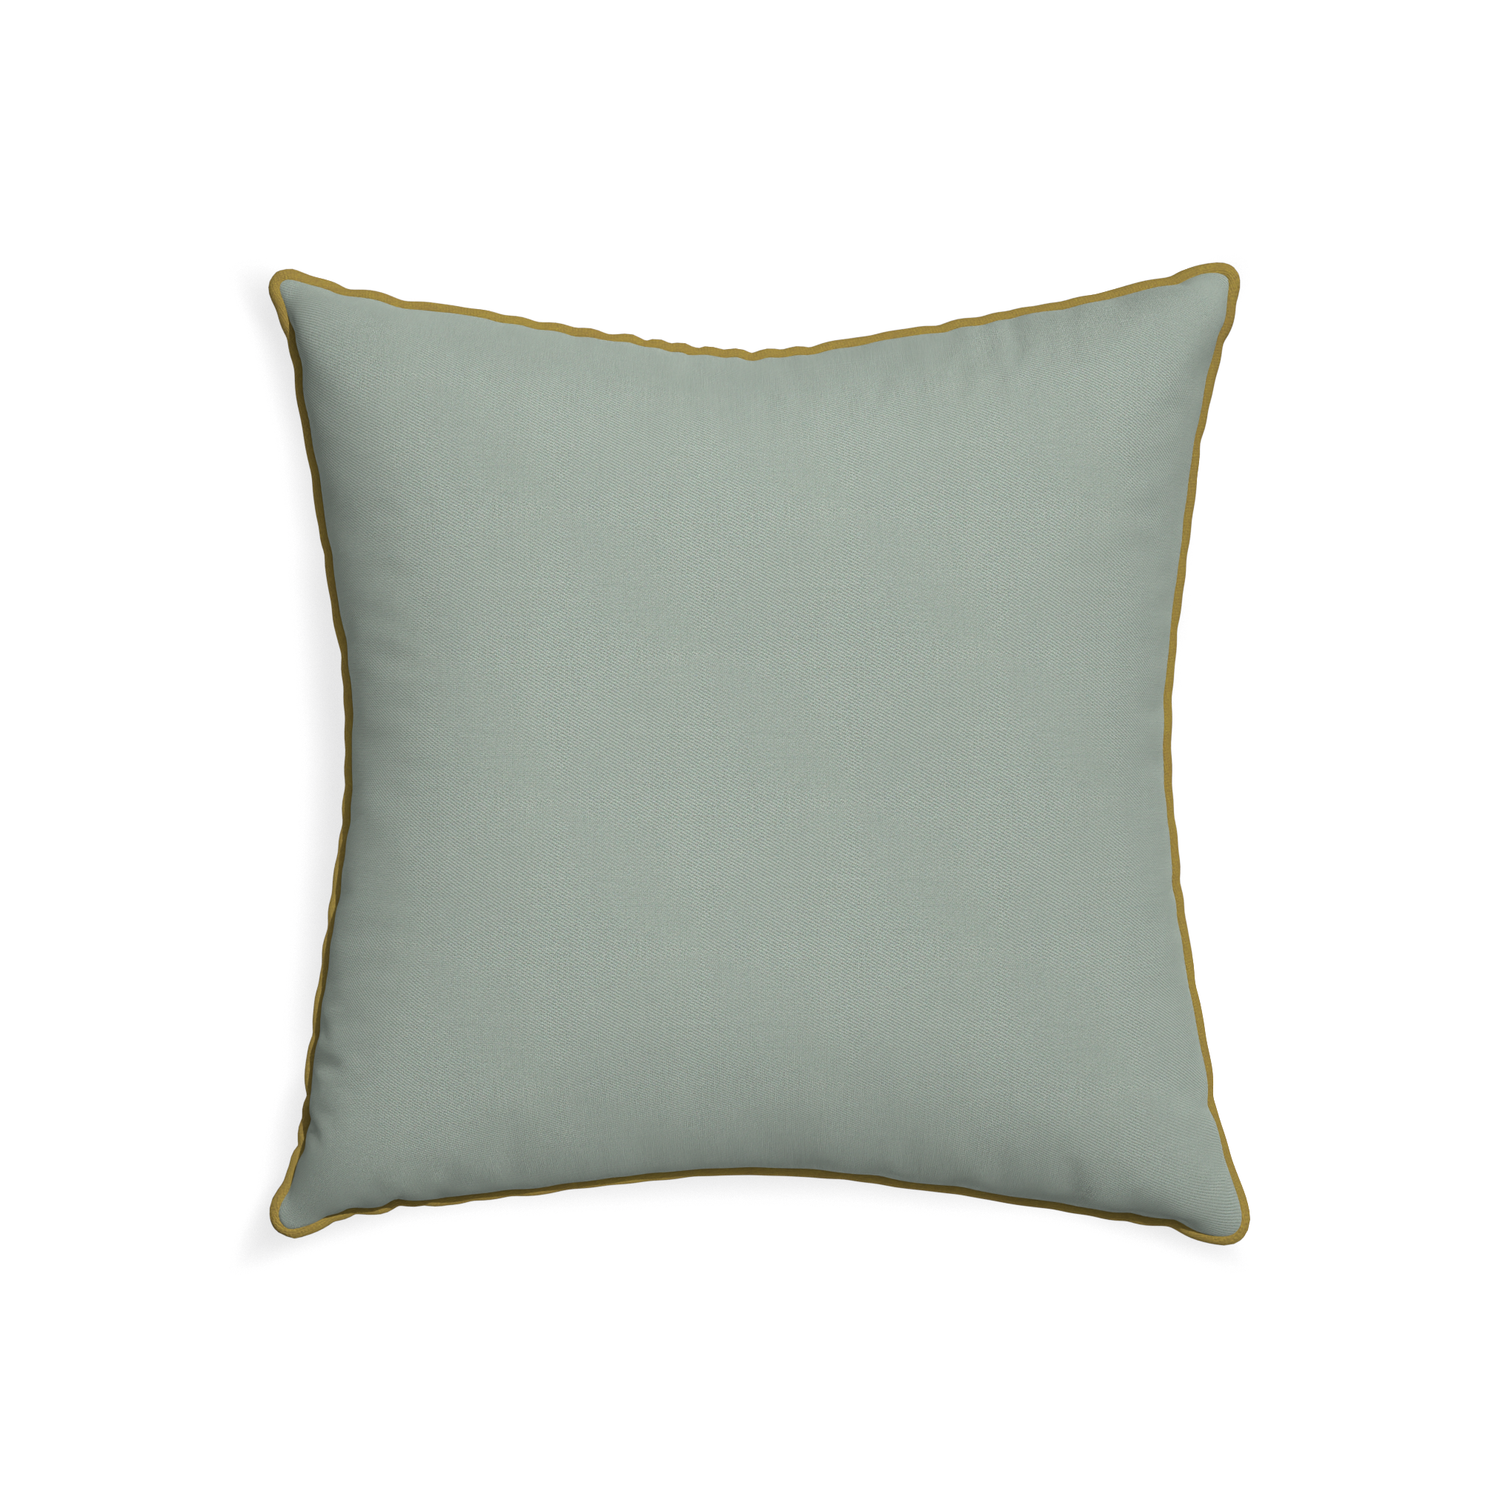 22-square sage custom sage green cottonpillow with c piping on white background